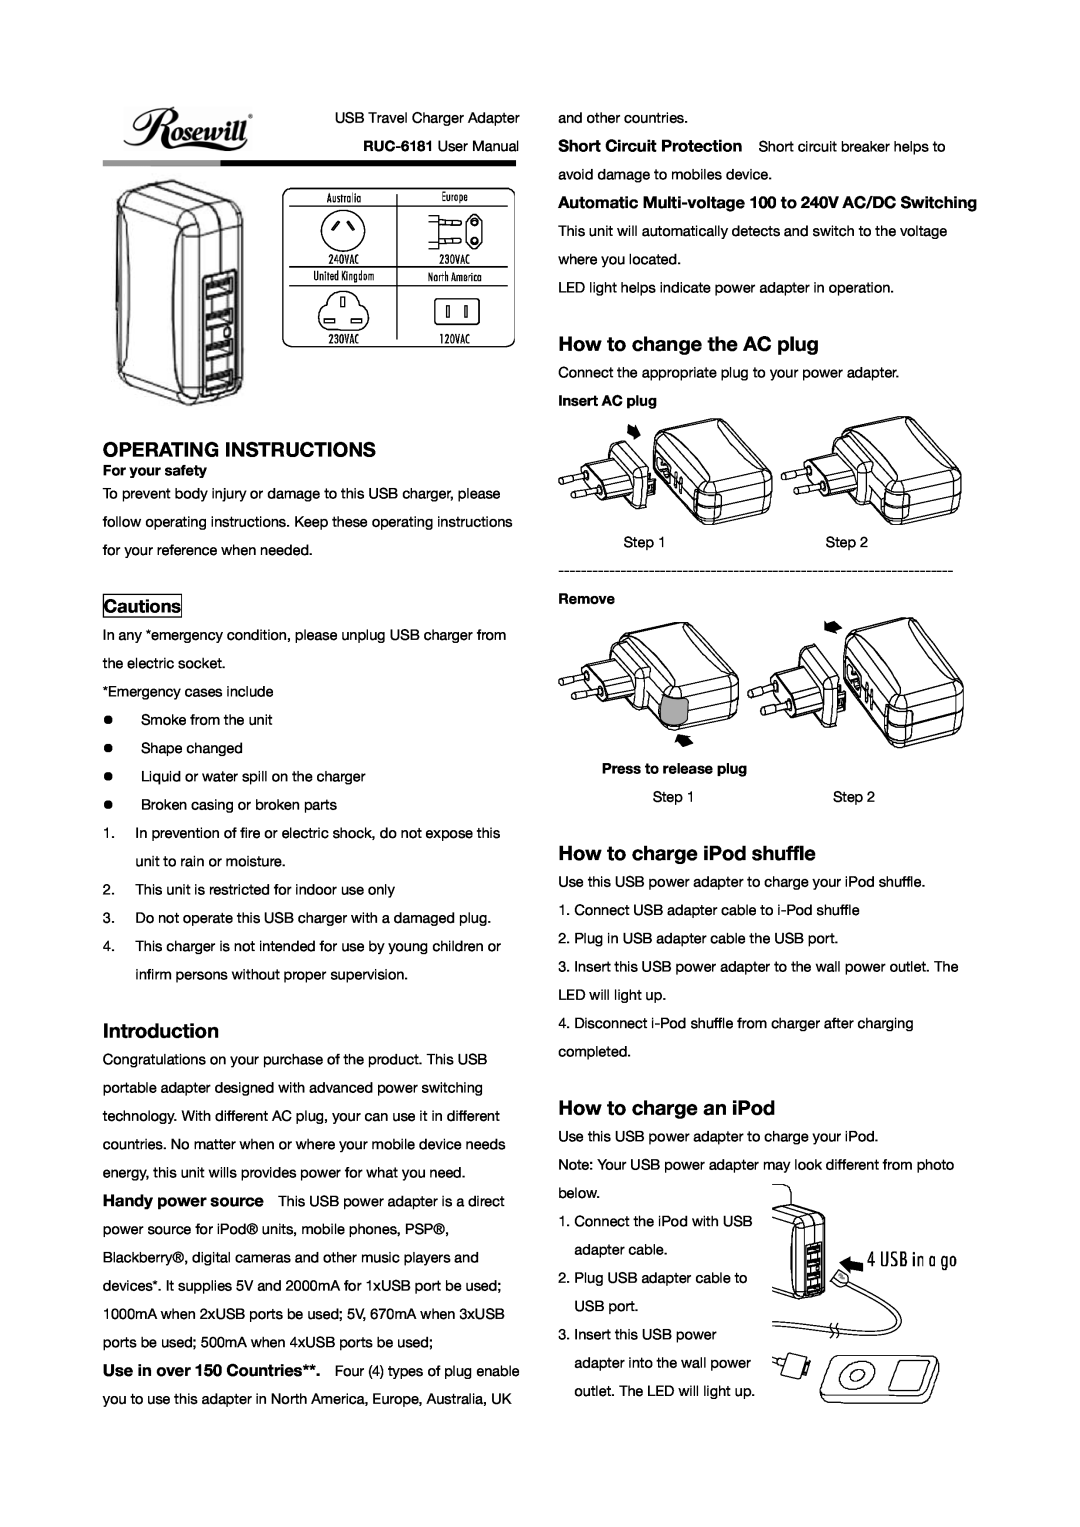 Rosewill RUC-6181 operating instructions How to change the AC plug, Operating Instructions, Introduction, Insert AC plug 